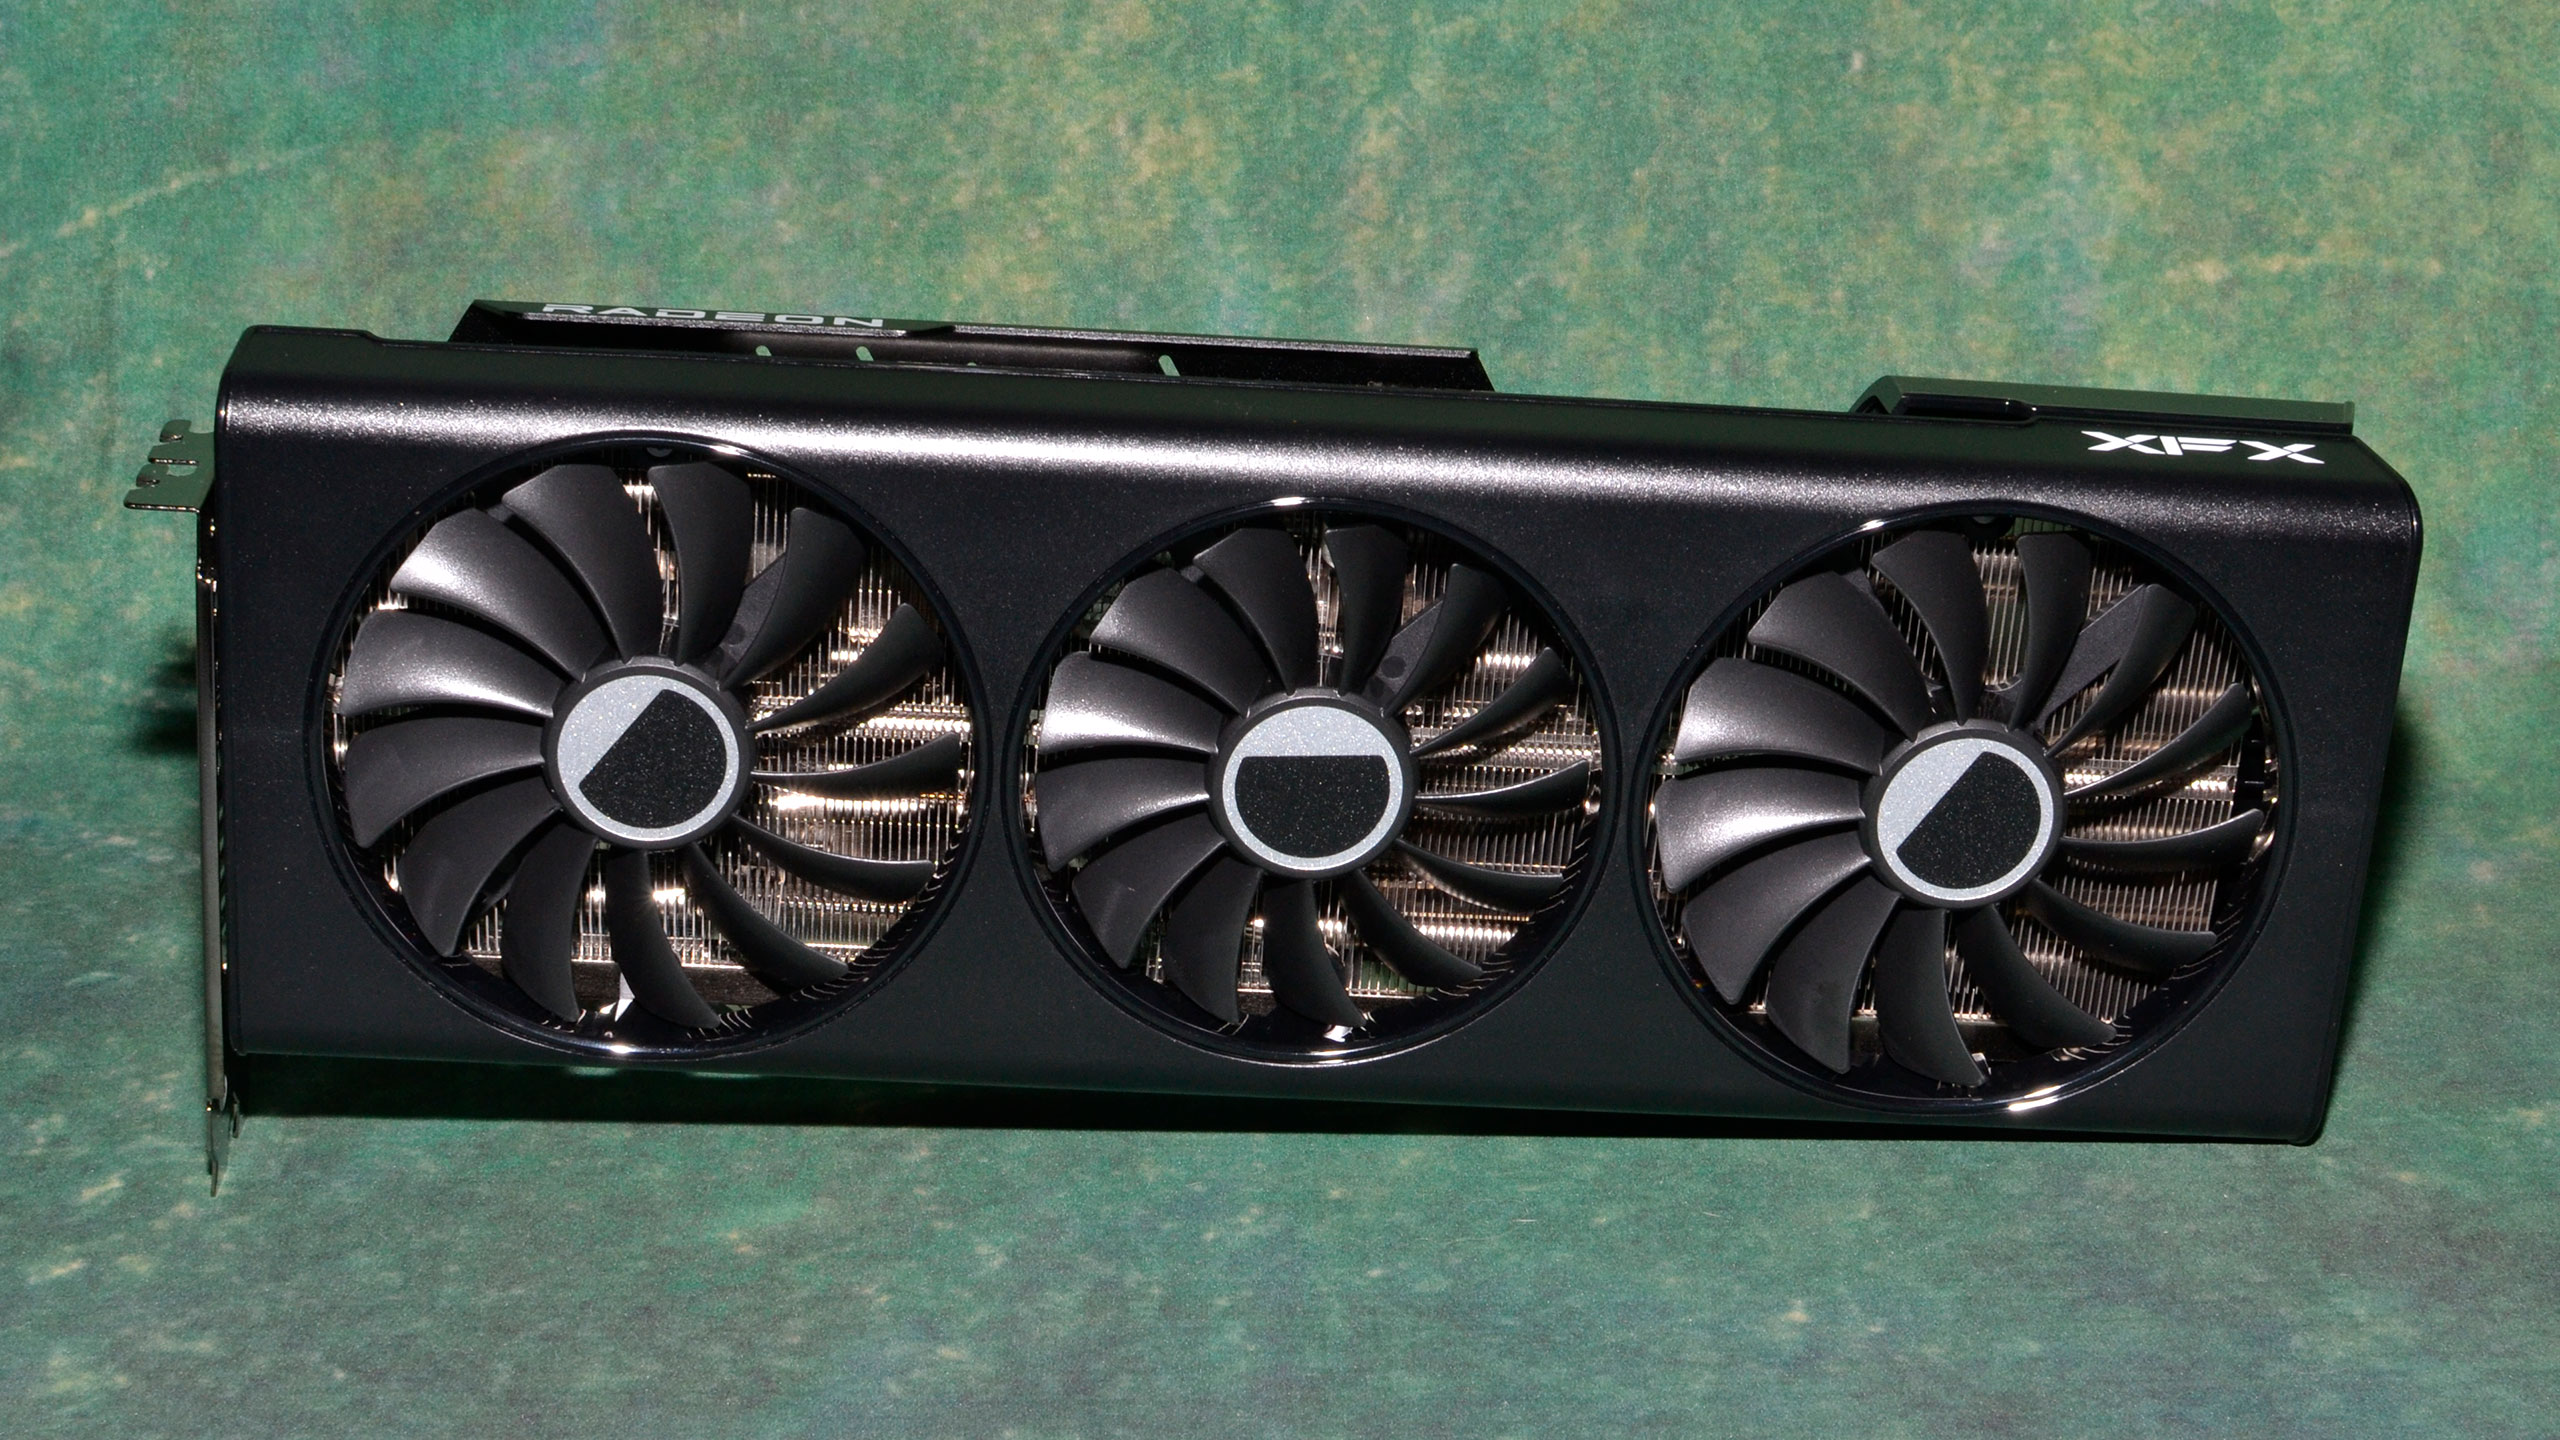 AMD Radeon RX 7700 XT and 7800 XT Are Coming for Your 1440p Gaming